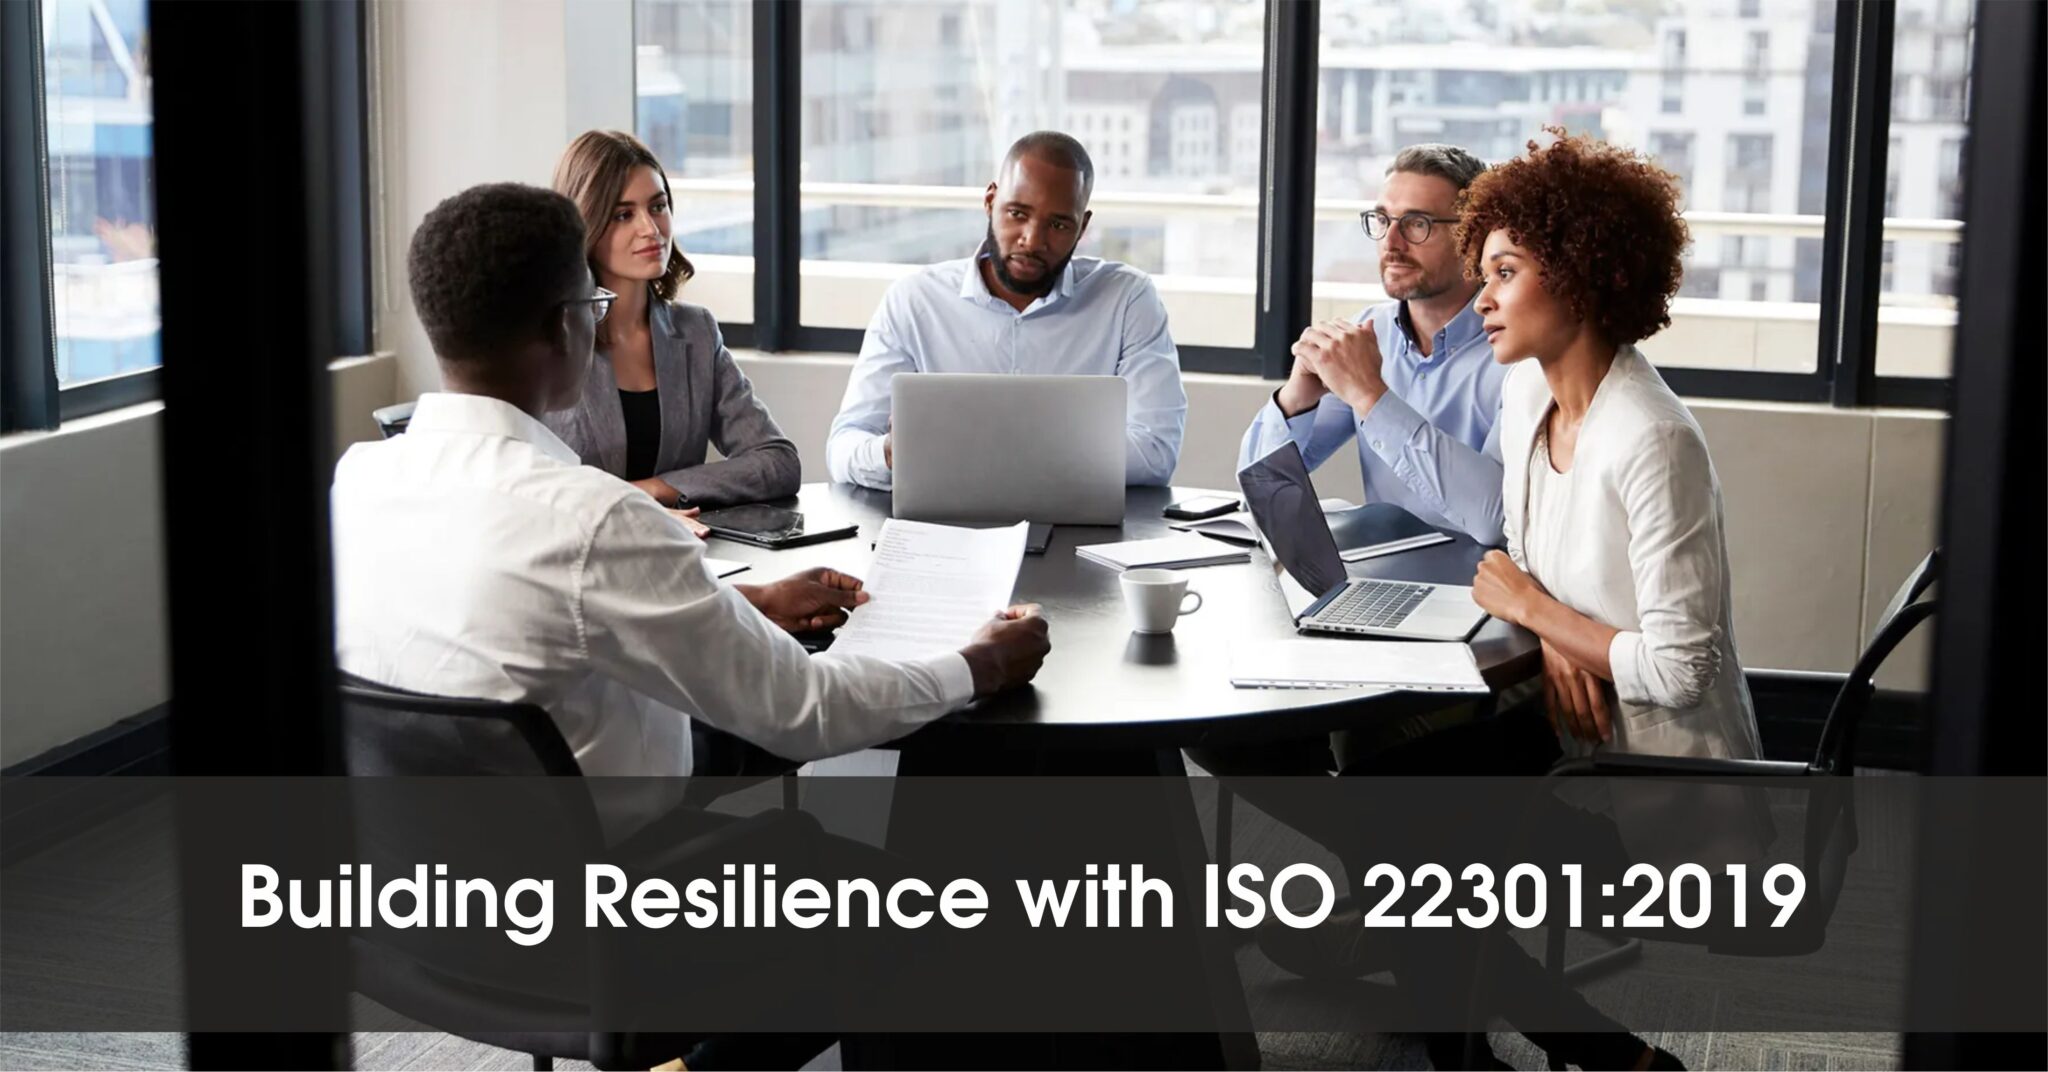 Building Resilience with ISO 22301:2019 - The Path to Success